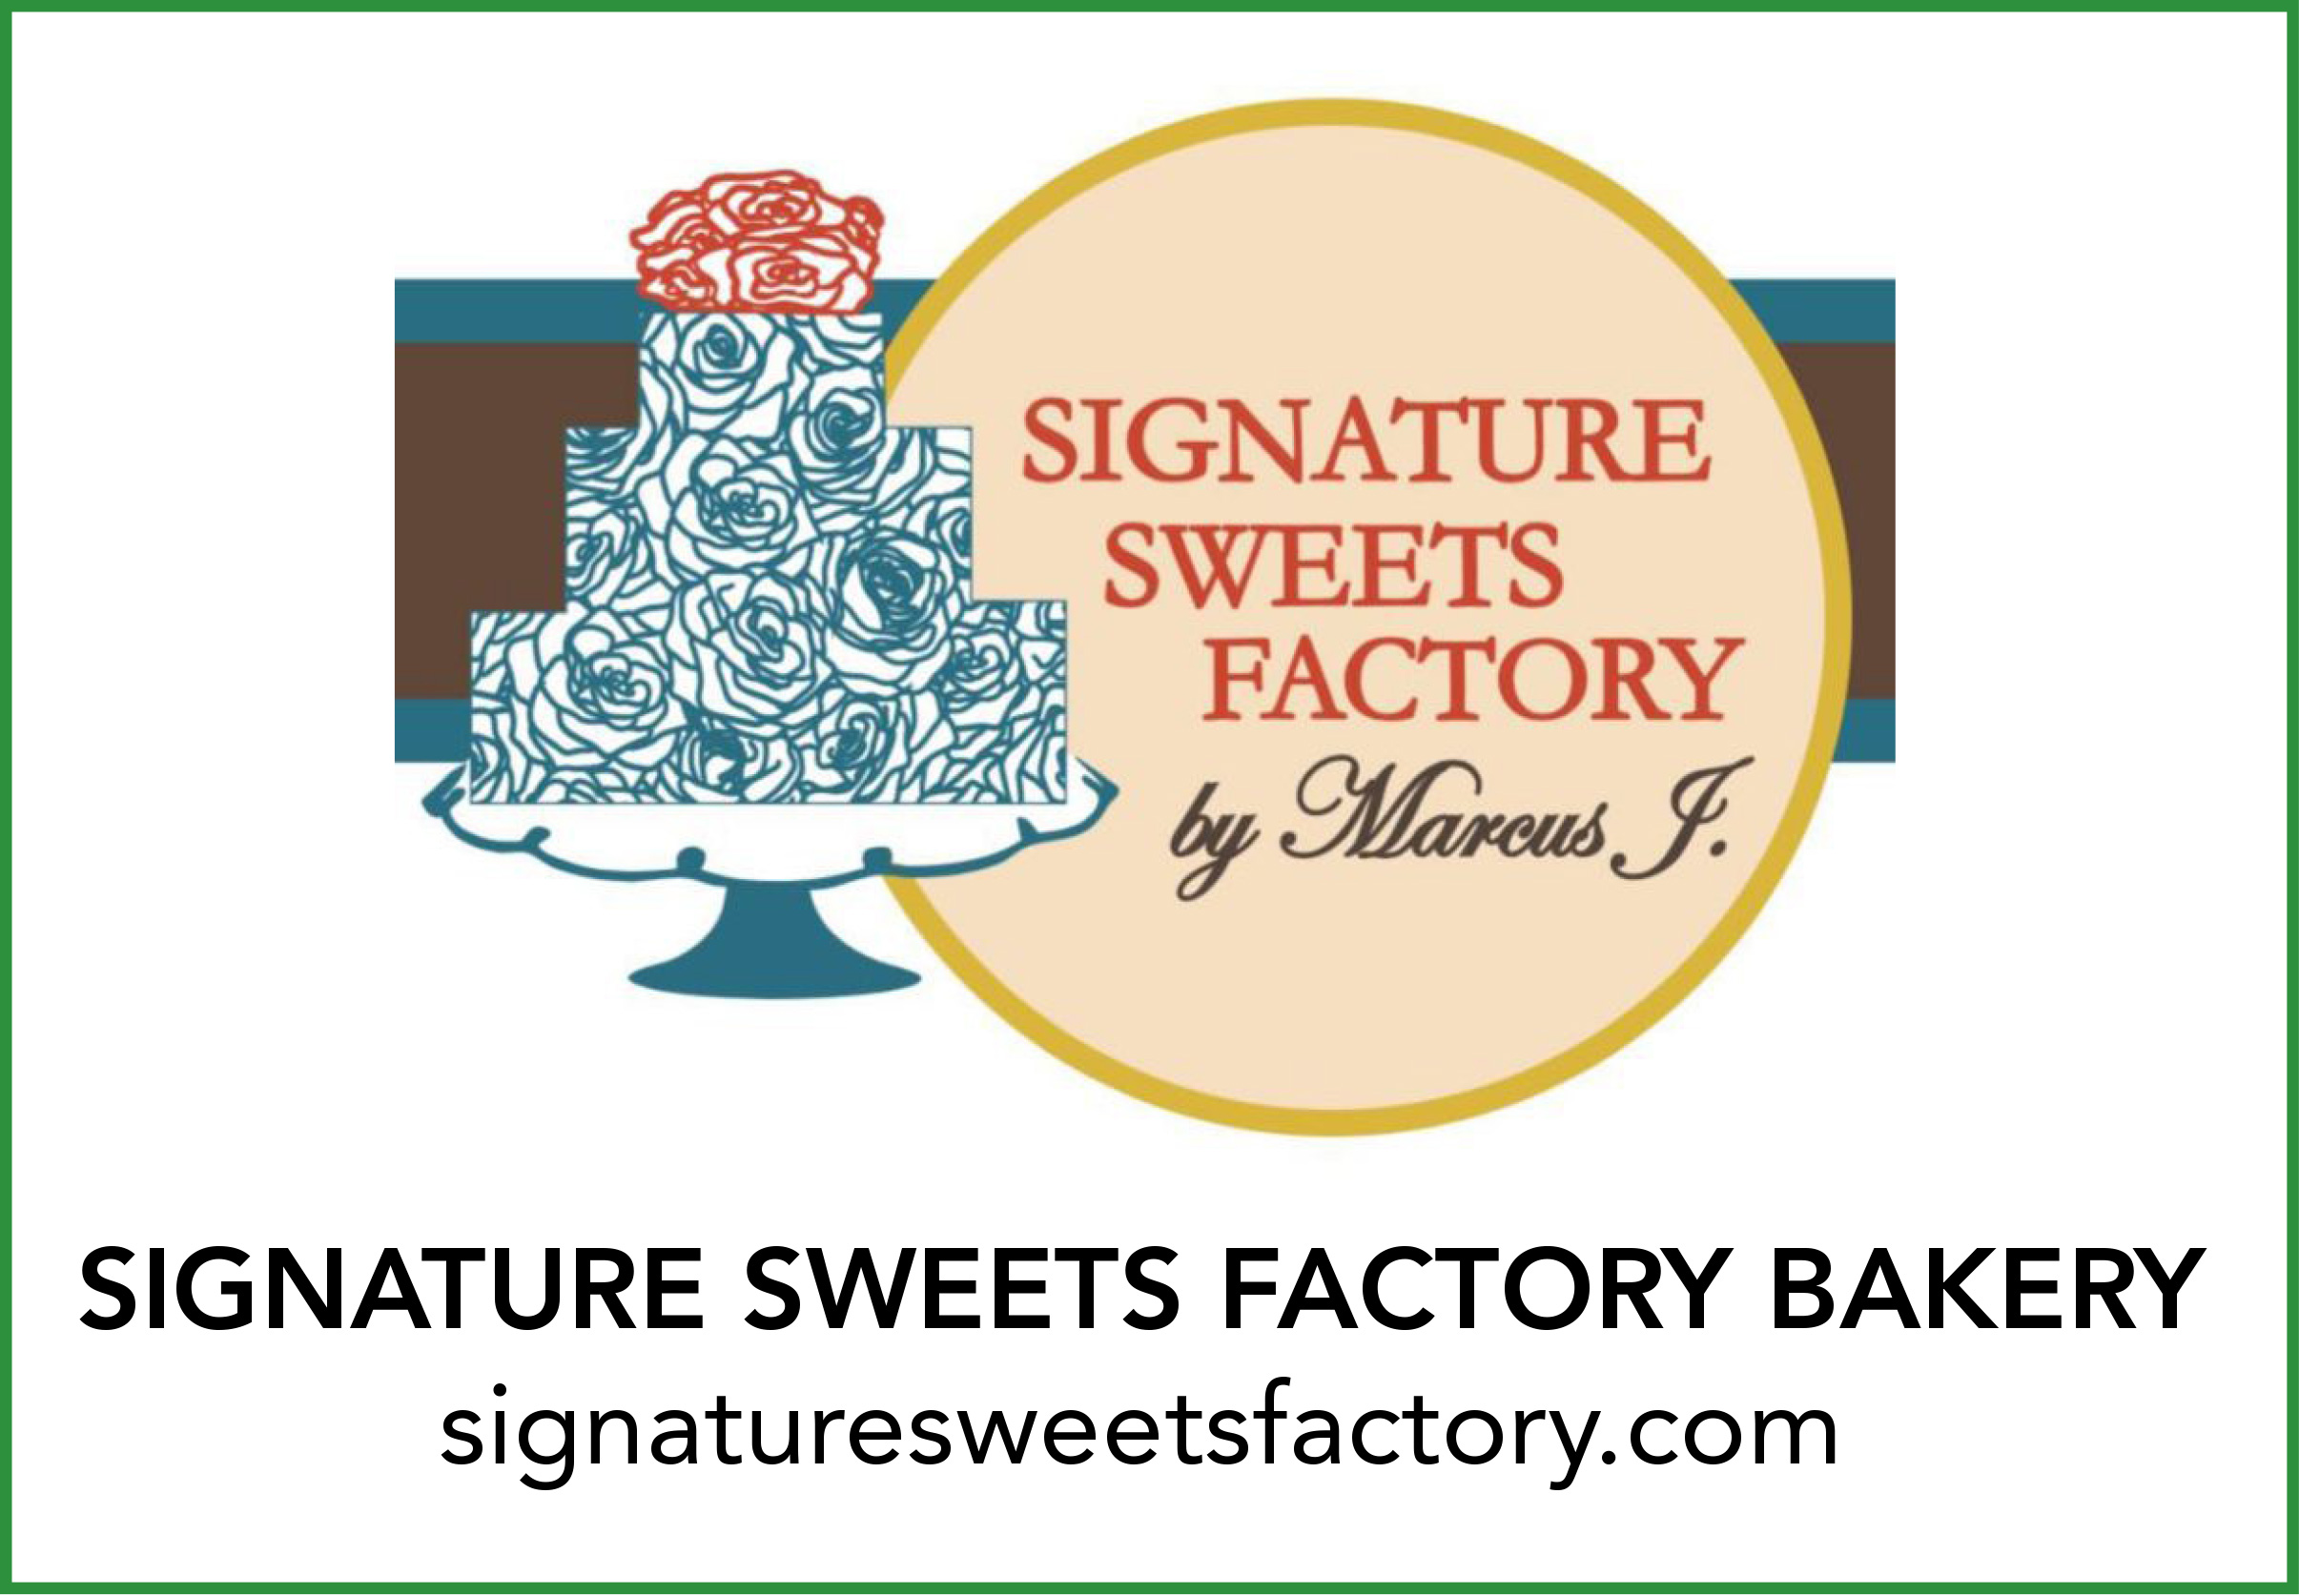 SIGNATURE SWEETS FACTORY BAKERY